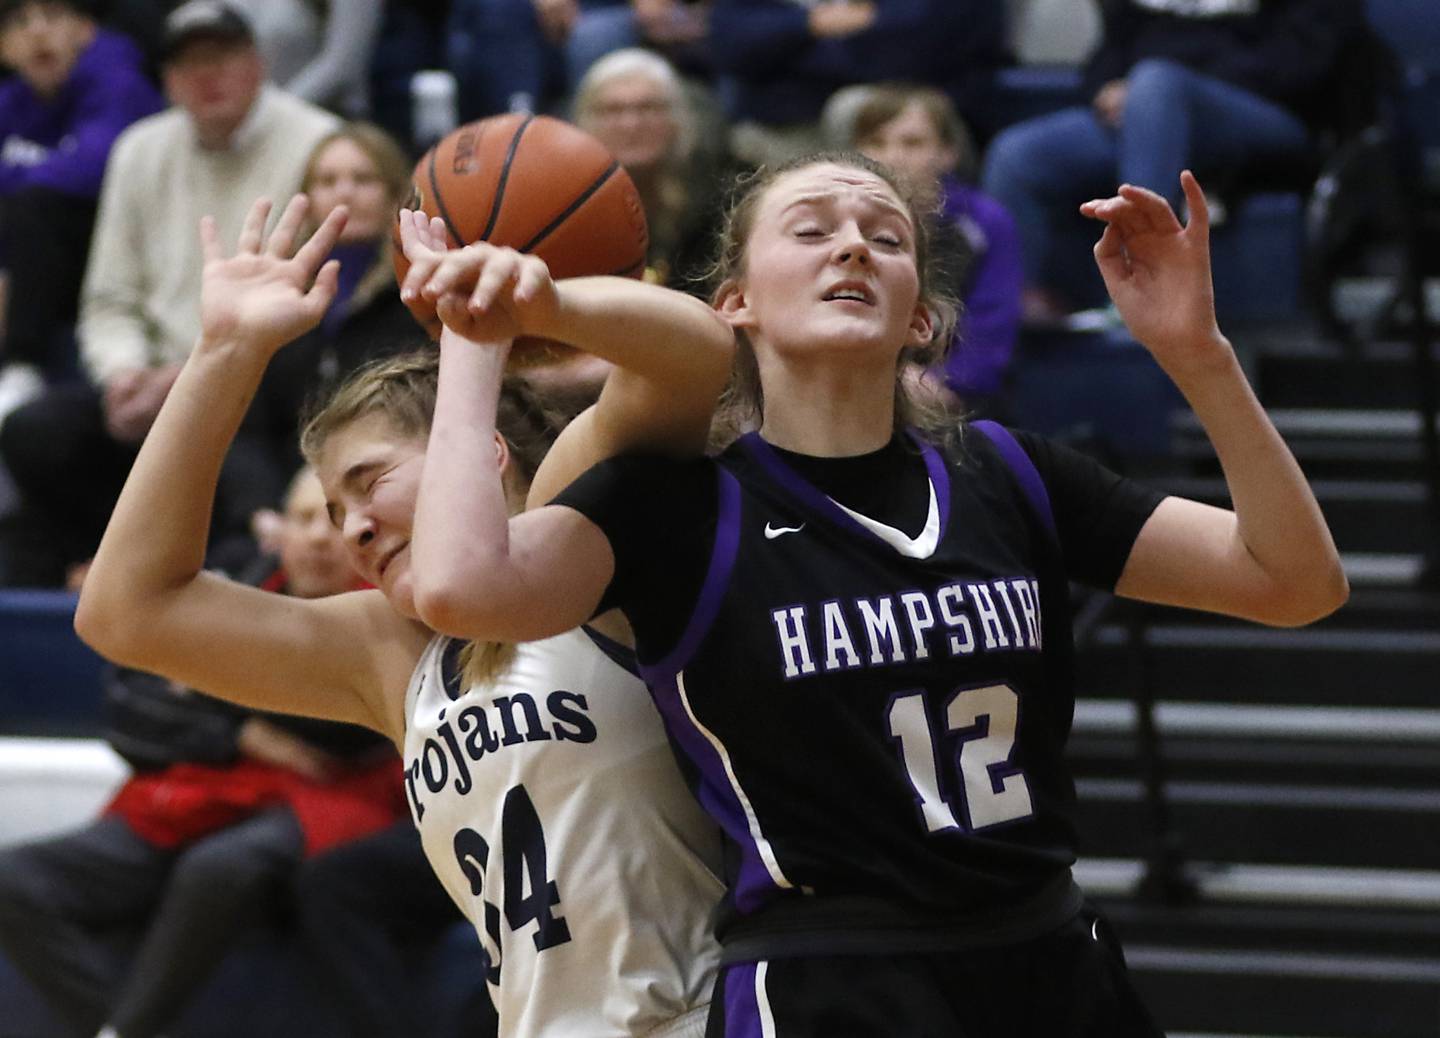 Cary-Grove's Annika Nordin battles with Hampshire's Kaitlyn Milison for a rebound during a Fox Valley Conference girls basketball game Friday, Dec.2, 2022, between Cary-Grove and Hampshire at Cary-Grove High School in Cary.